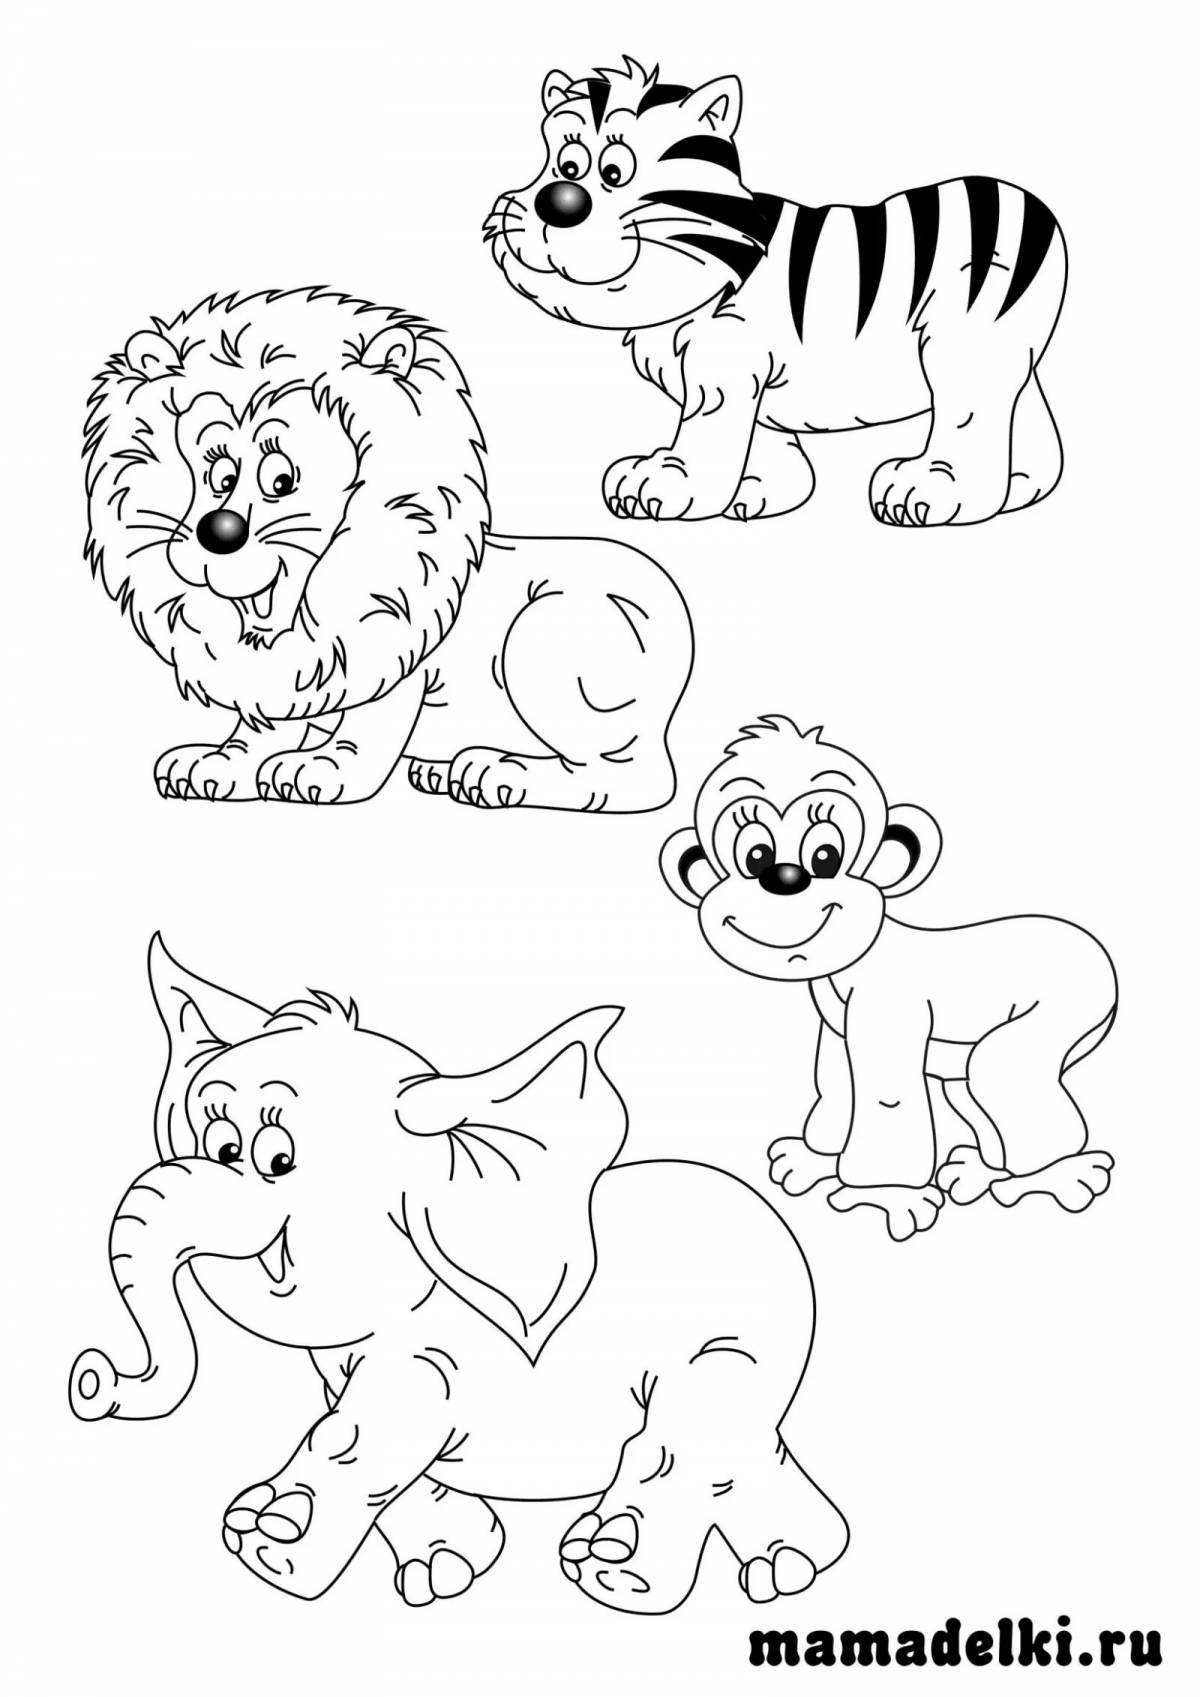 Coloring pages animals of hot countries for children 5-6 years old